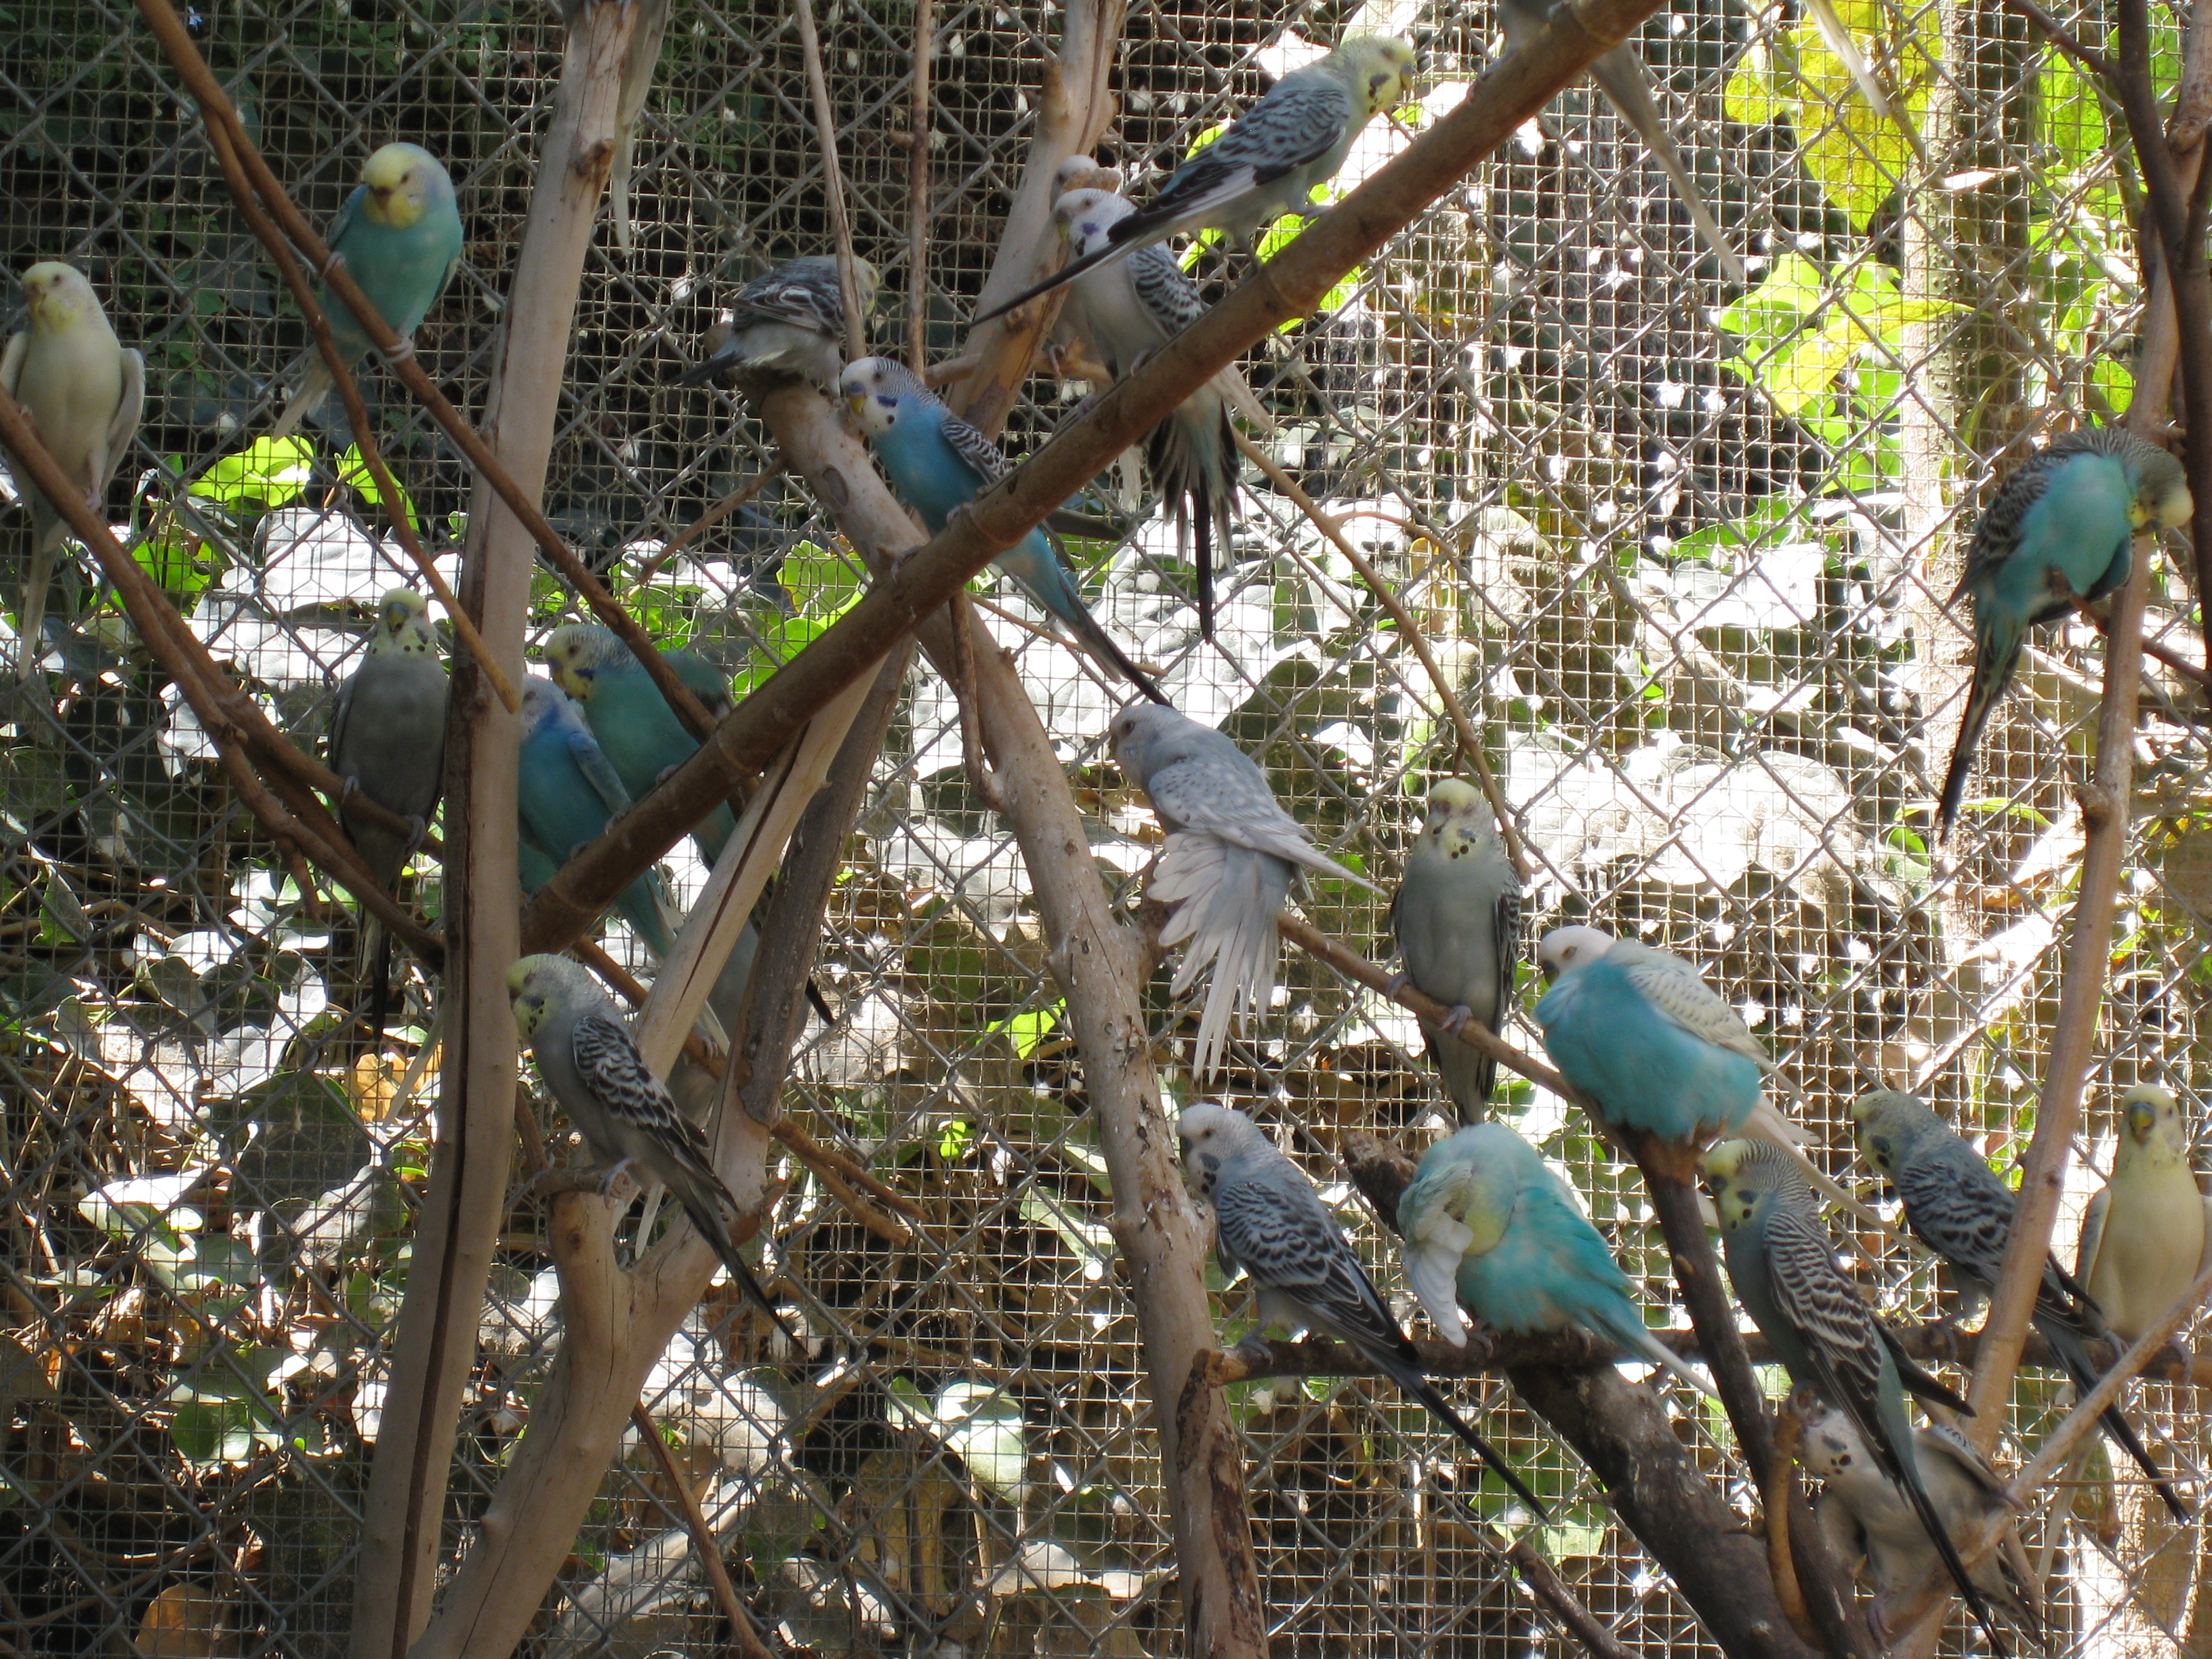 The aviary housed these gorgeous birds. They chirped sweetly as we looked in on them. 